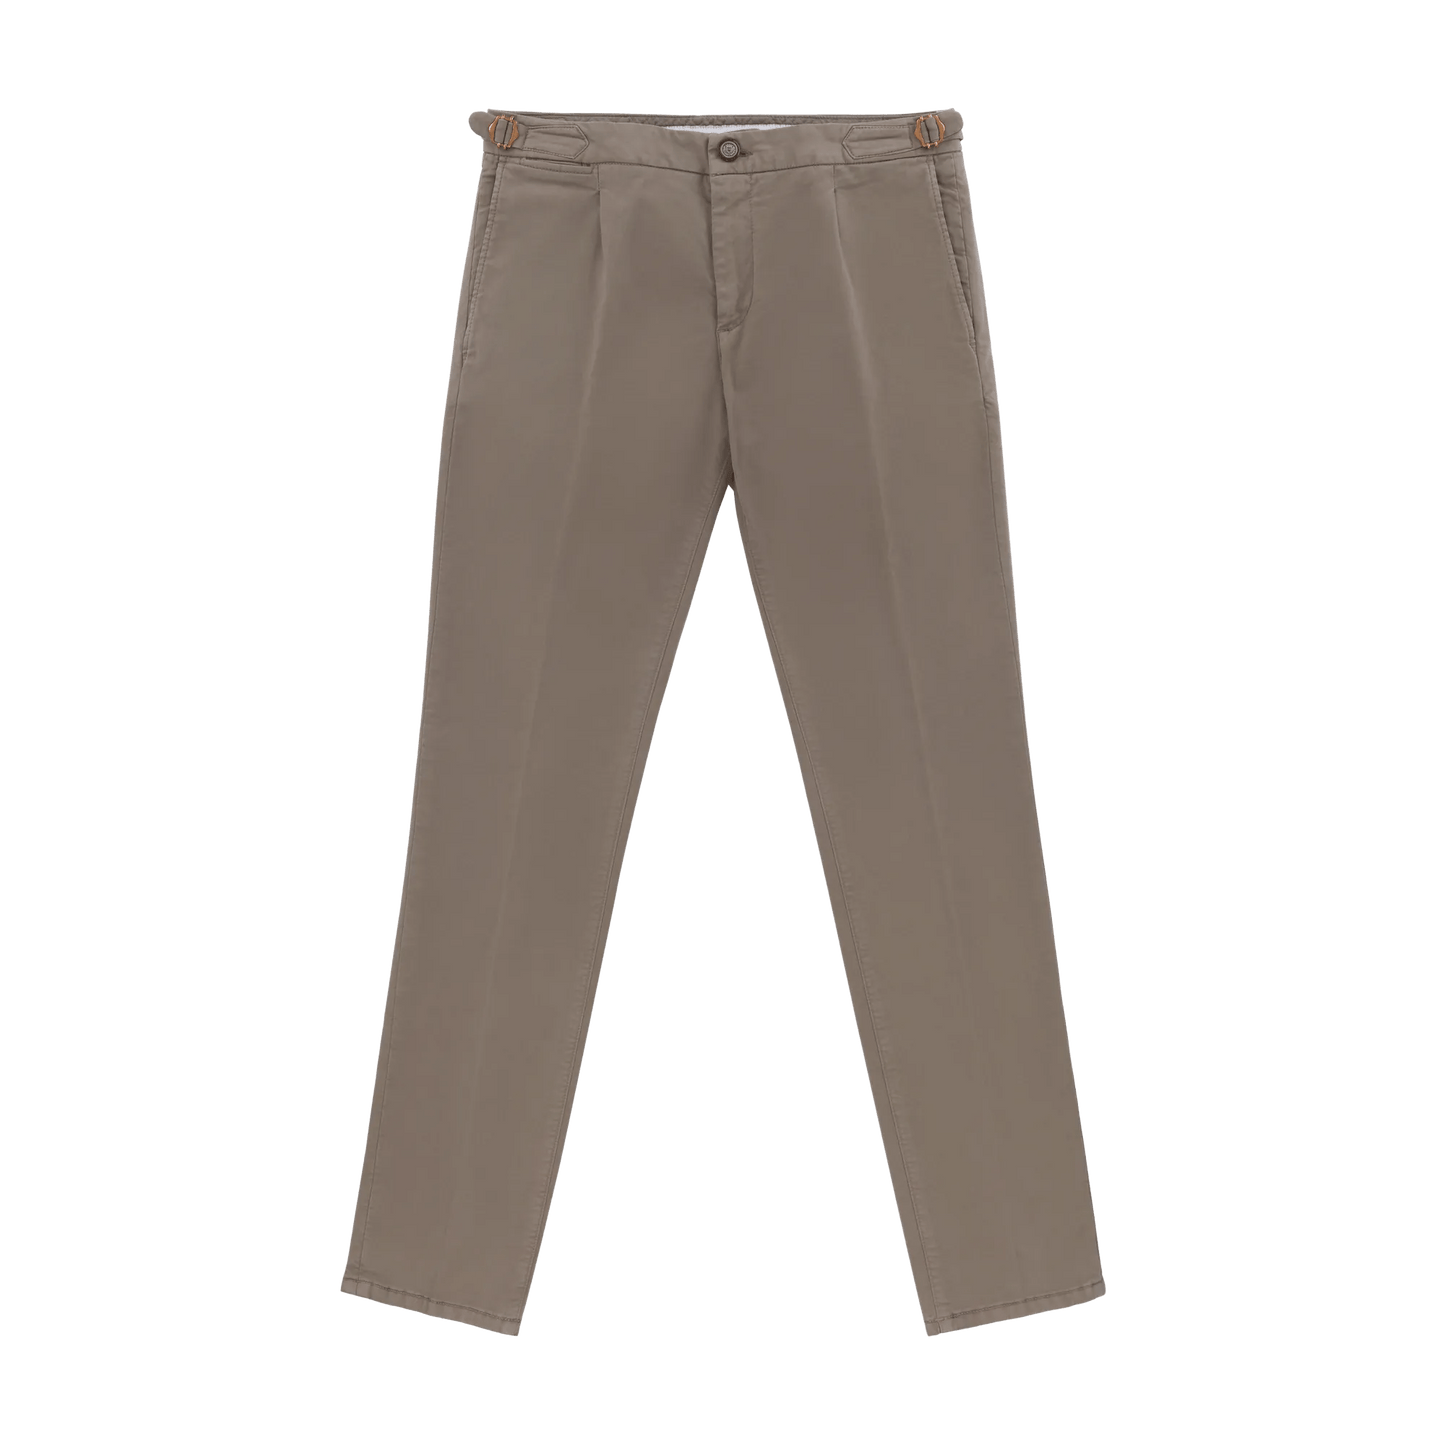 Richard J. Brown Slim - Fit Stretch - Cotton Trousers with Buckle Adjusters in Taupe - SARTALE